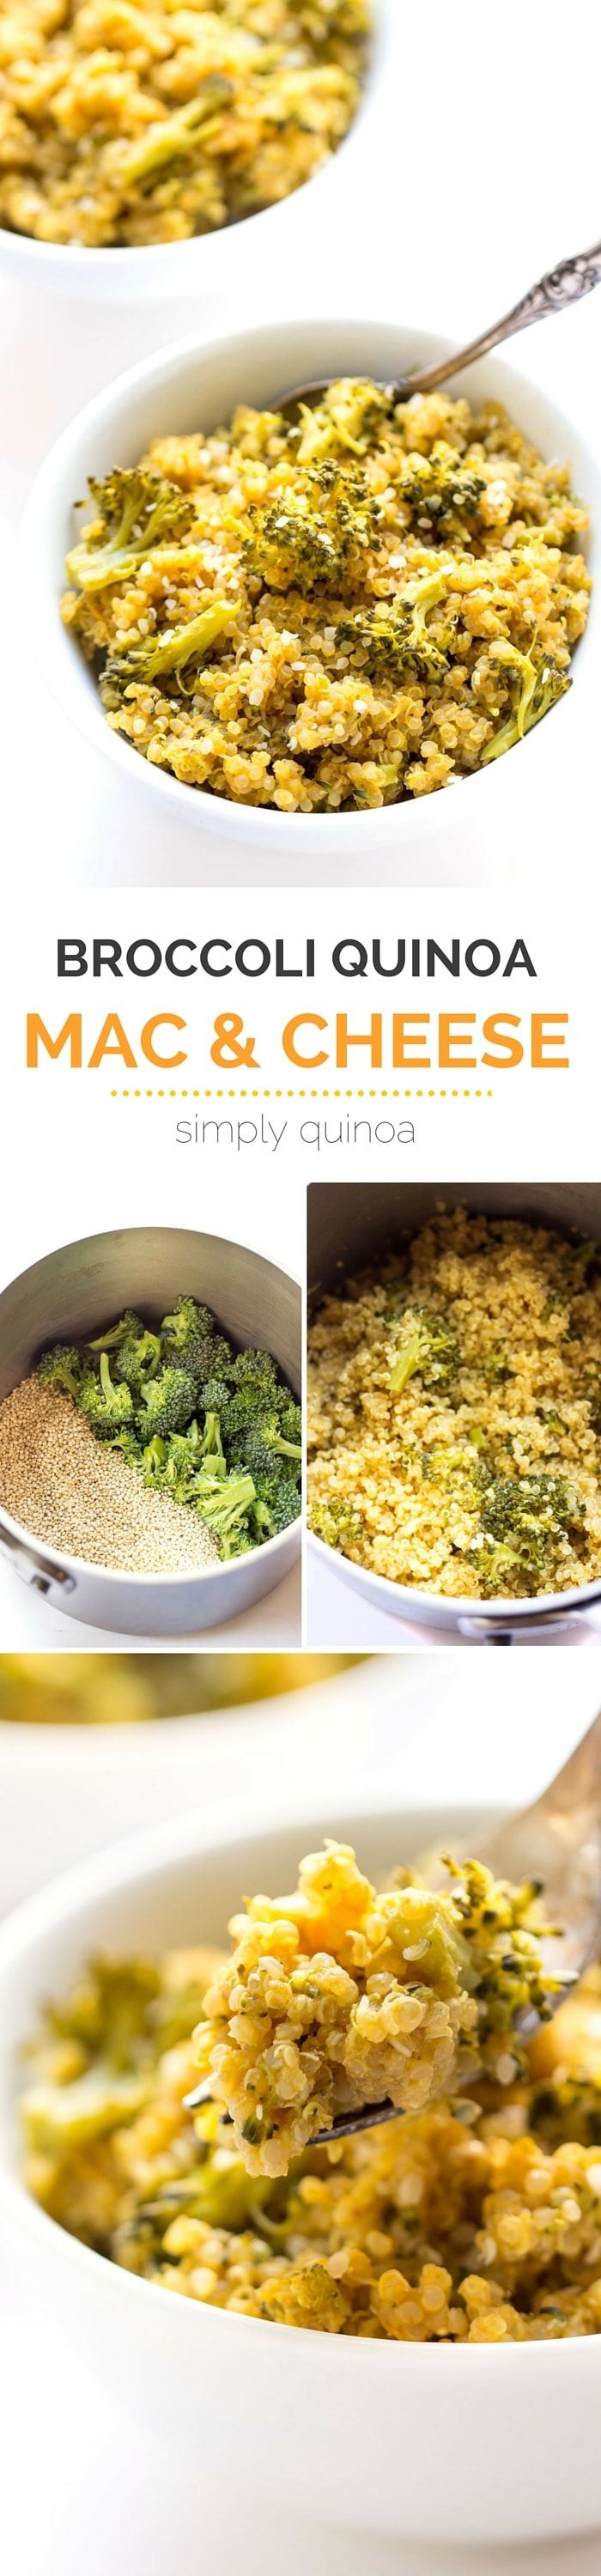 QUINOA MAC AND CHEESE with broccoli — the perfect dinner recipe when you think you have no time to cook. Takes just one pot,